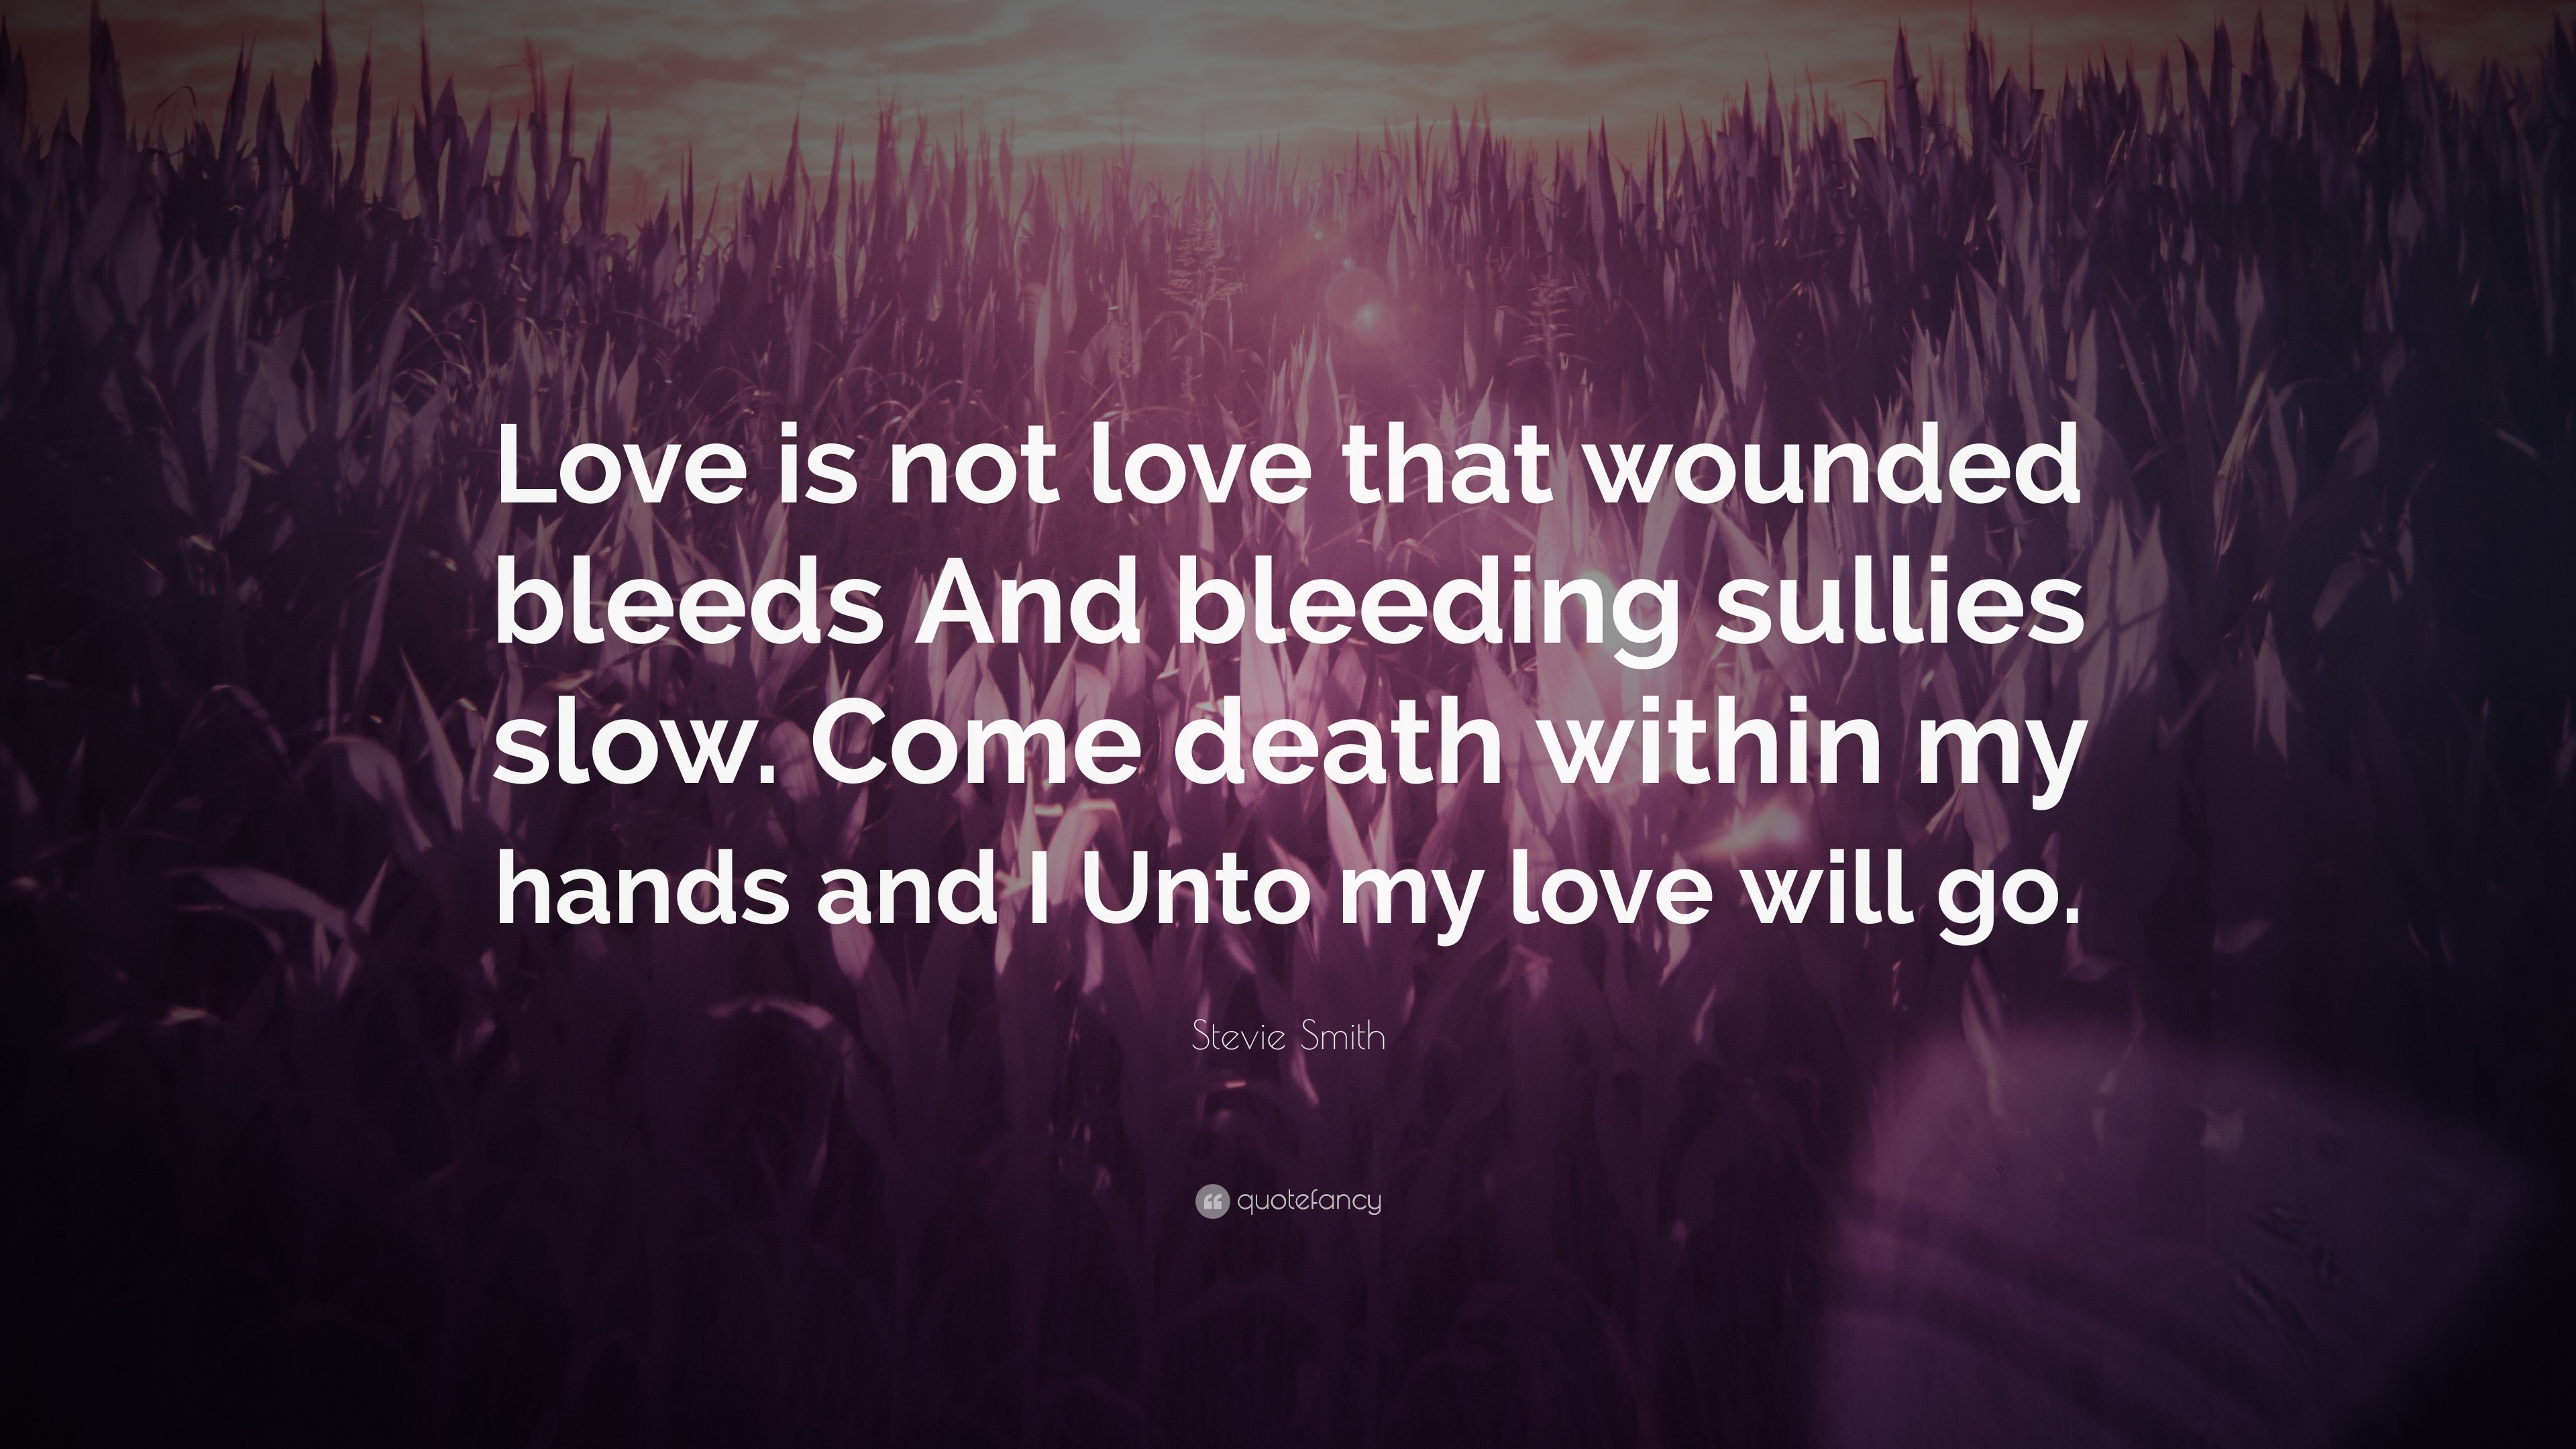 Stevie Smith Quote “Love is not love that wounded bleeds And bleeding sullies slow